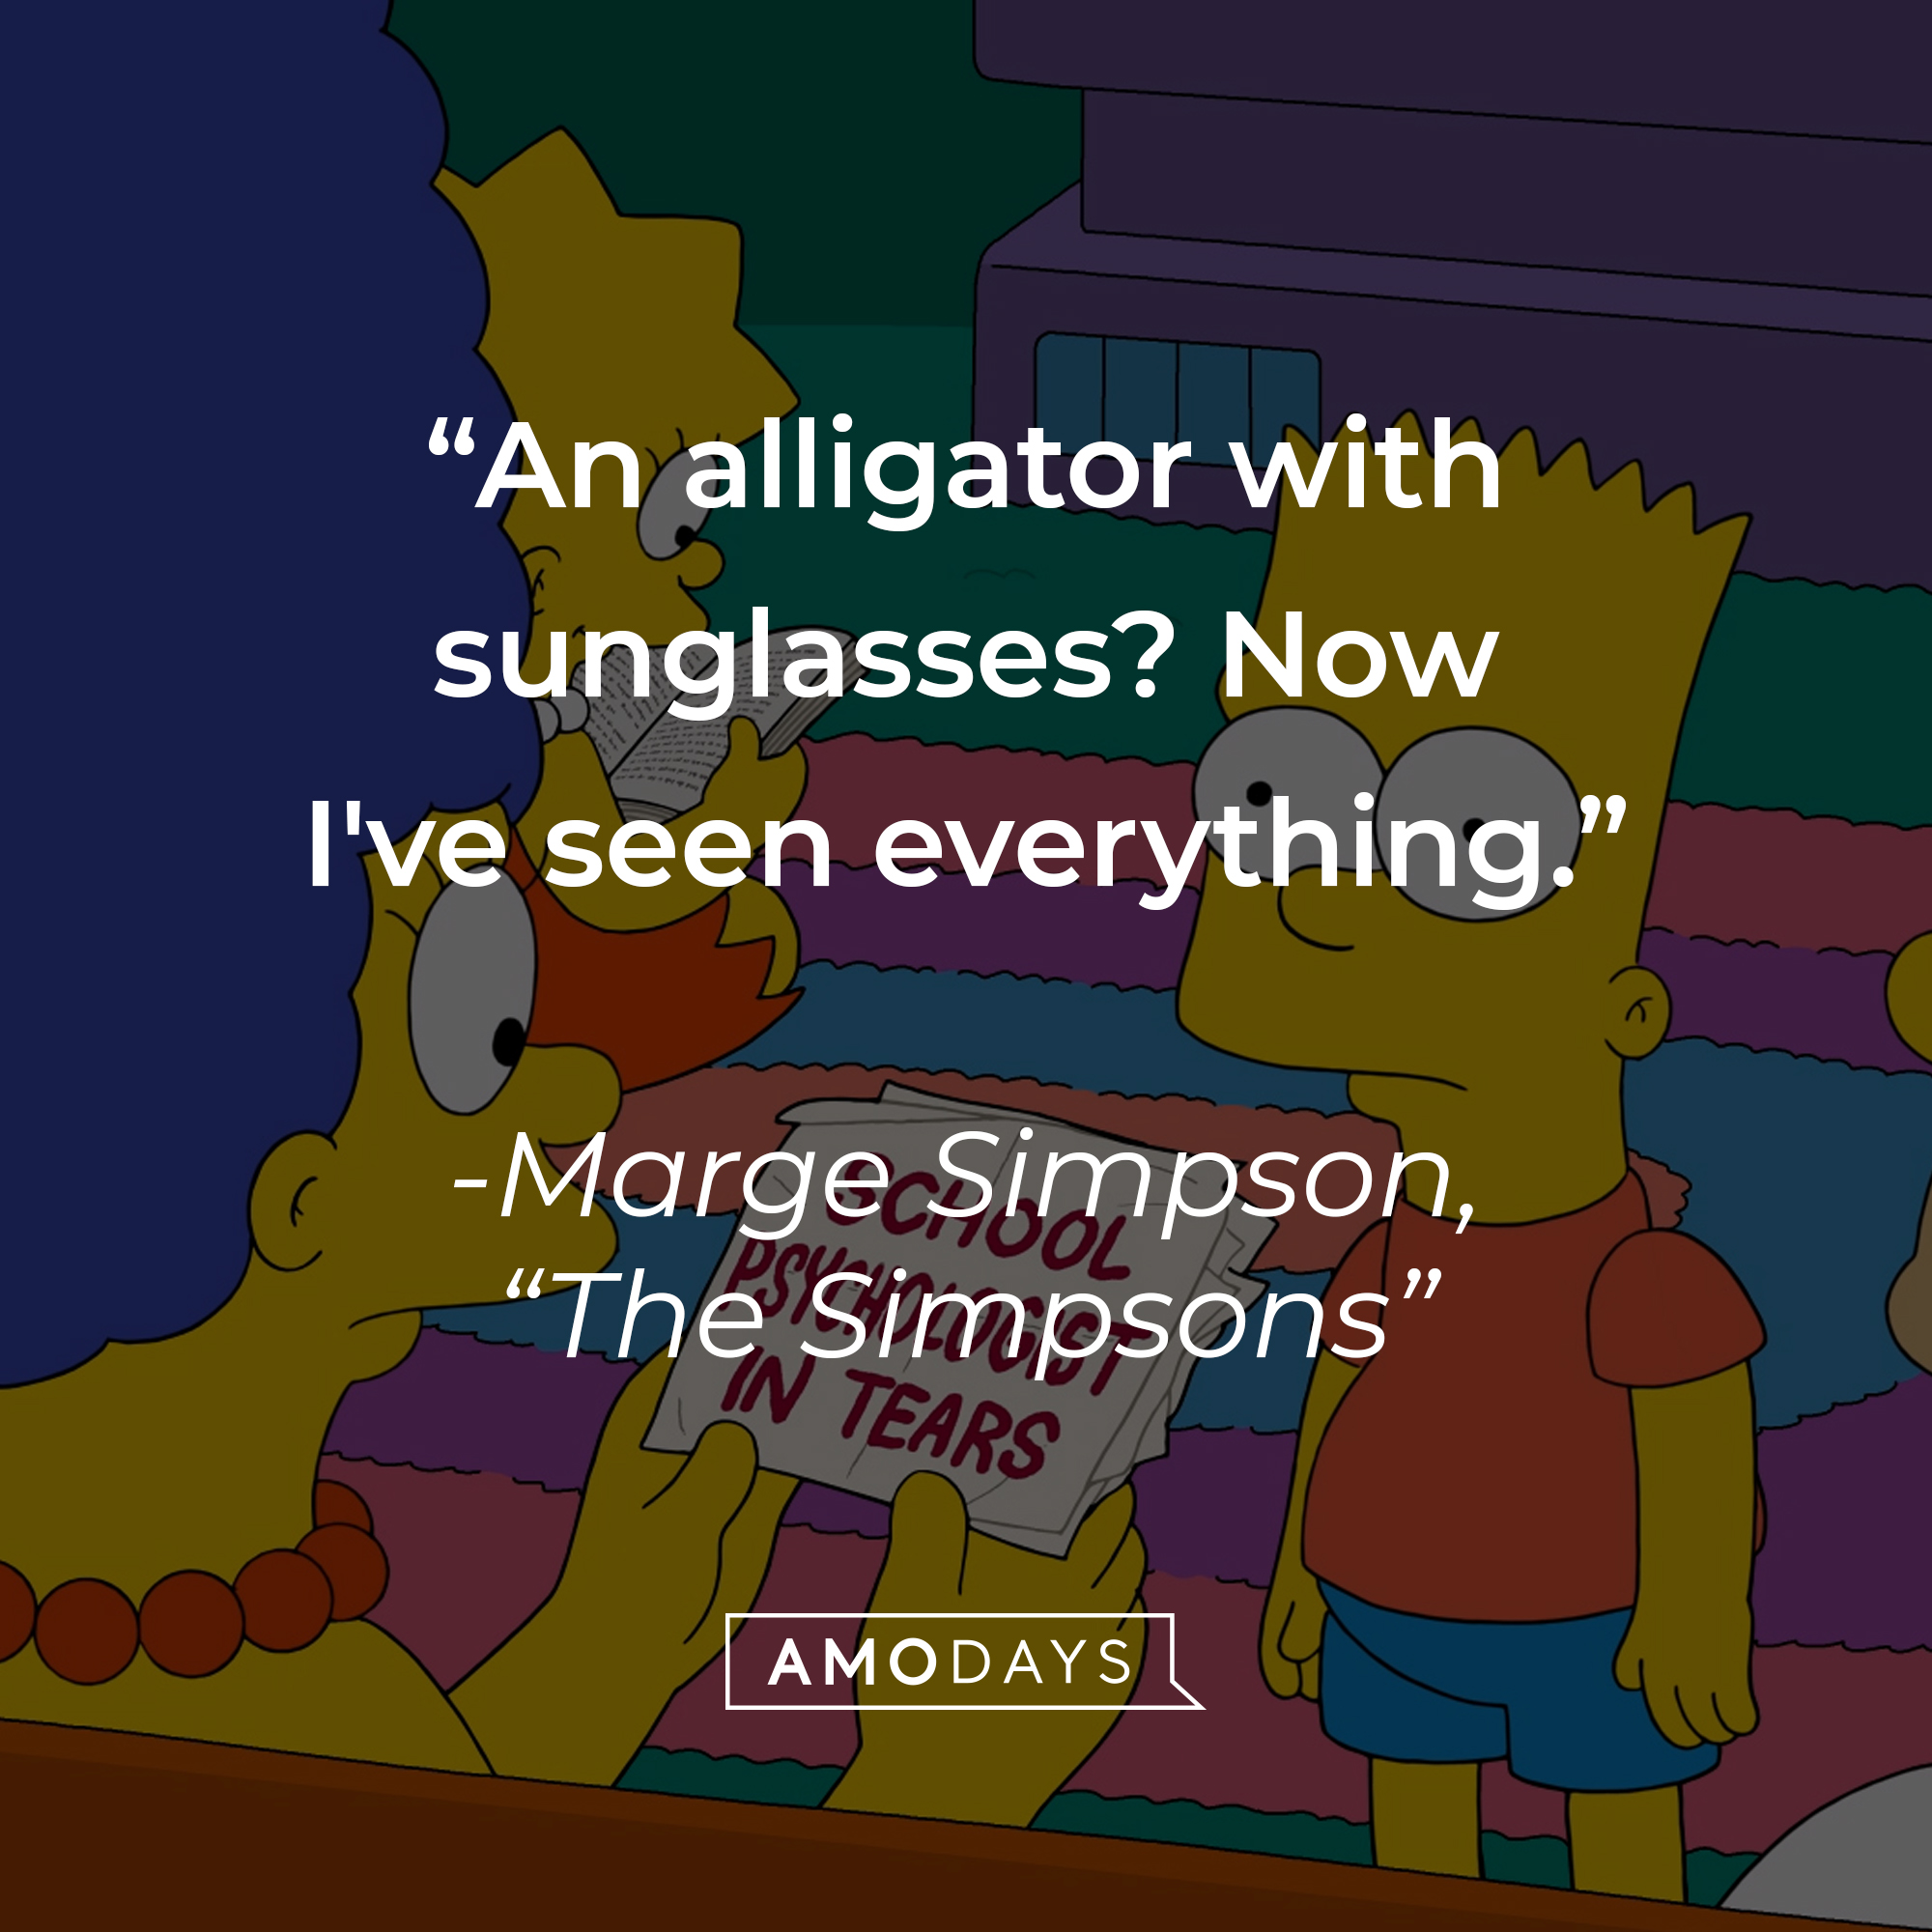 Marge Simpson's quote: "An alligator with sunglasses? Now I've seen everything." | Image: facebook.com/TheSimpsons